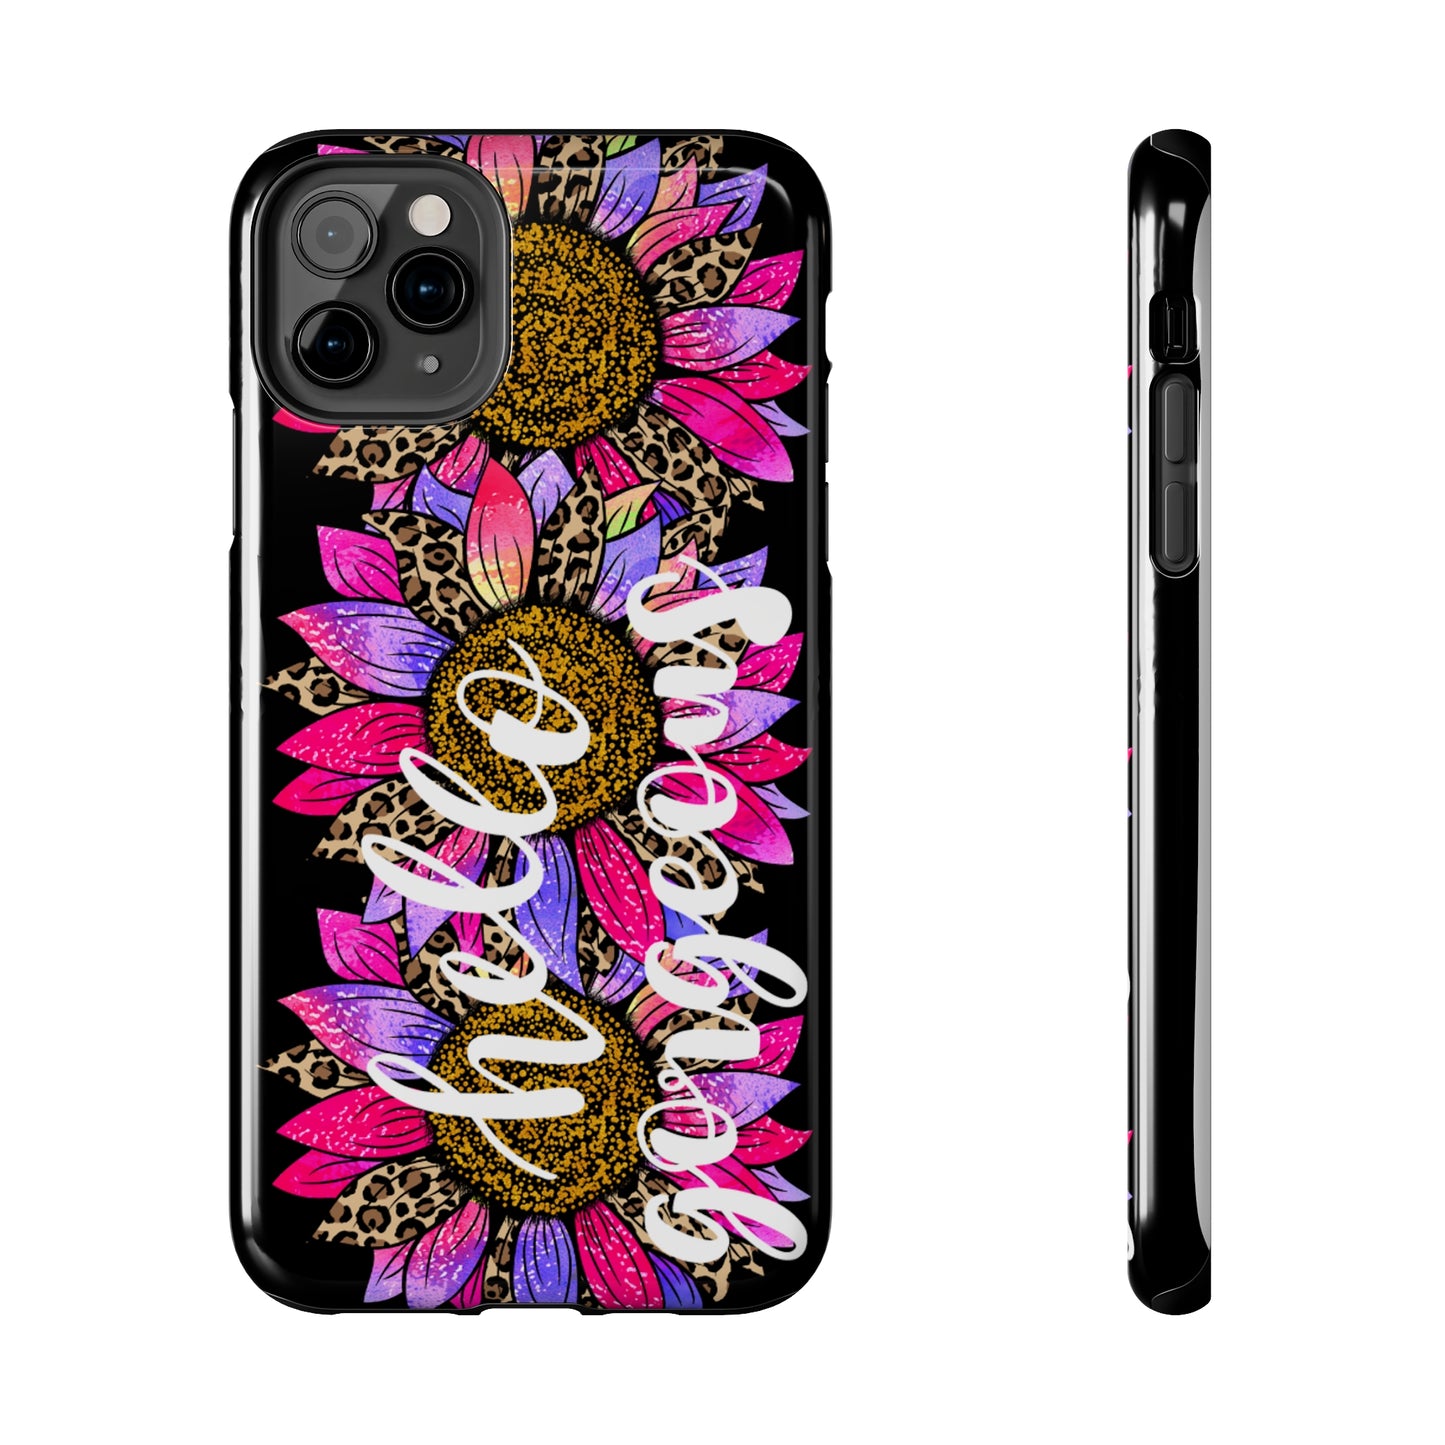 Hello Gorgeous Pink Purple Leopard Sunflowers iPhone Case - Stylish Floral Protective Cover